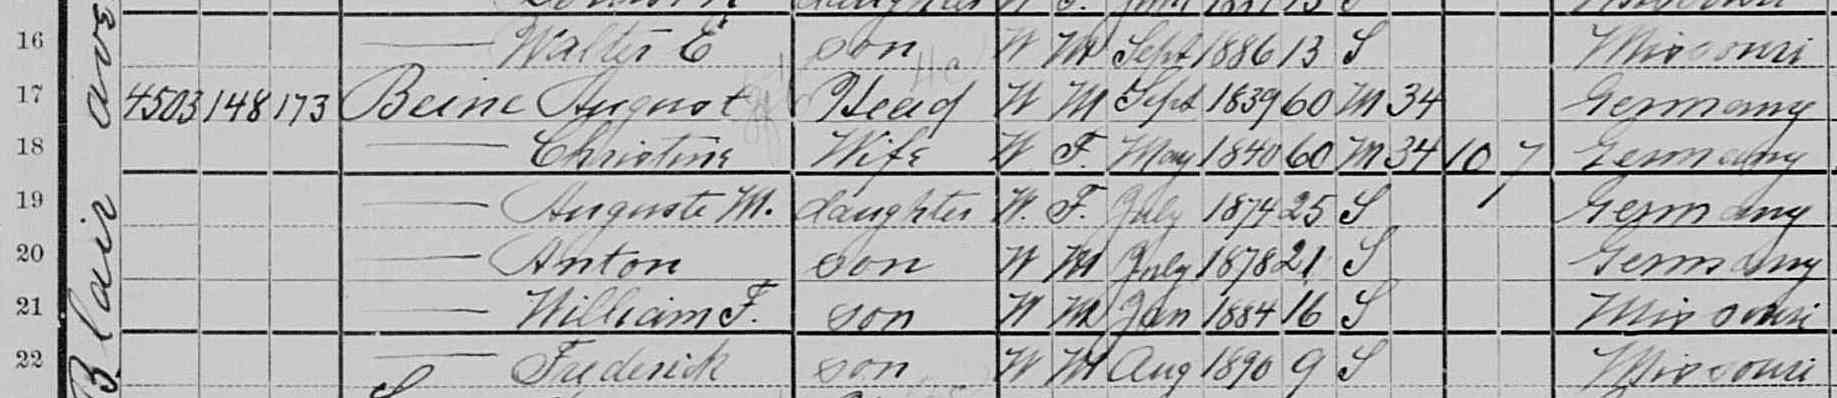 August and Christine Beine and family, 1900 census, St. Louis, Missouri (NARA/FamilySearch)